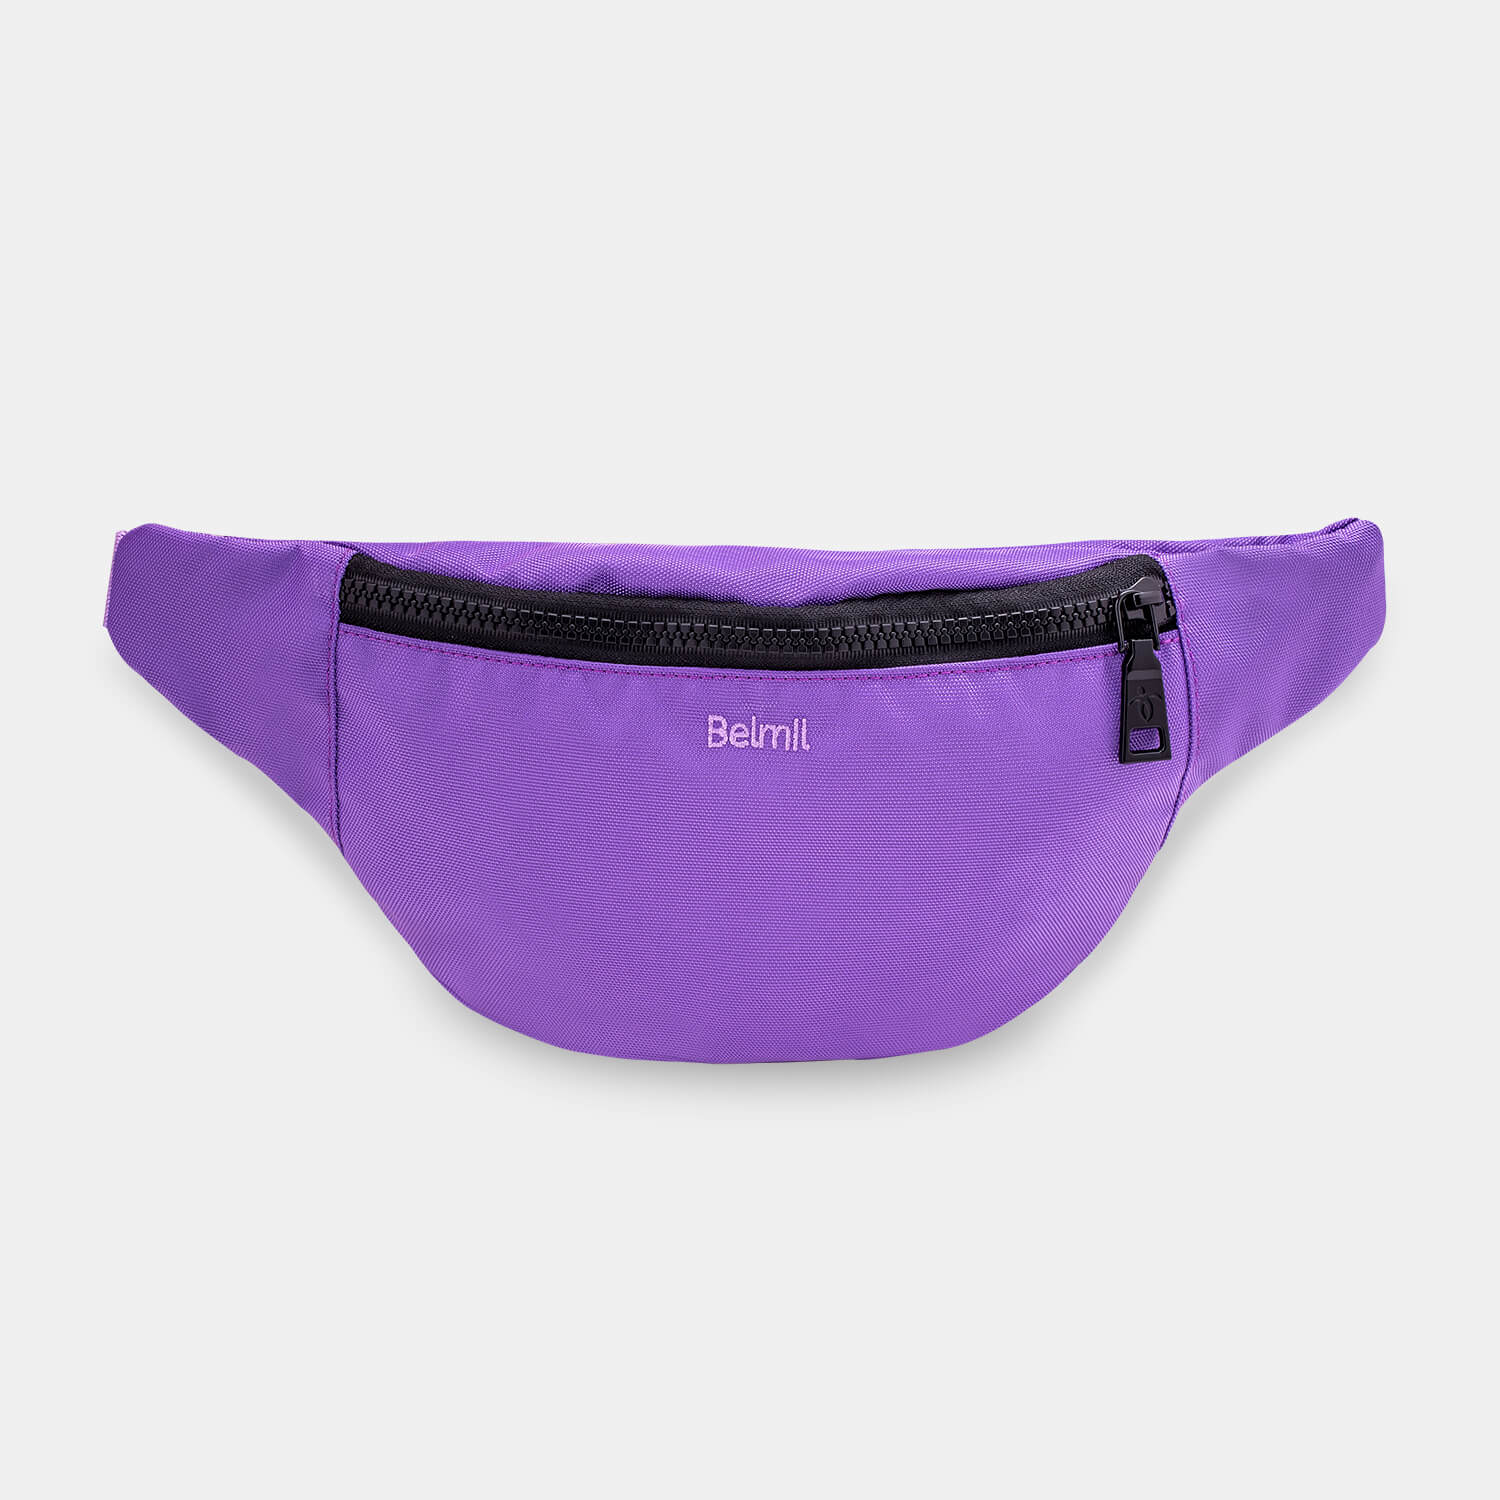 Backpack & Fanny Pack Tulip Purple Schoolbag with GRATIS Gymbag